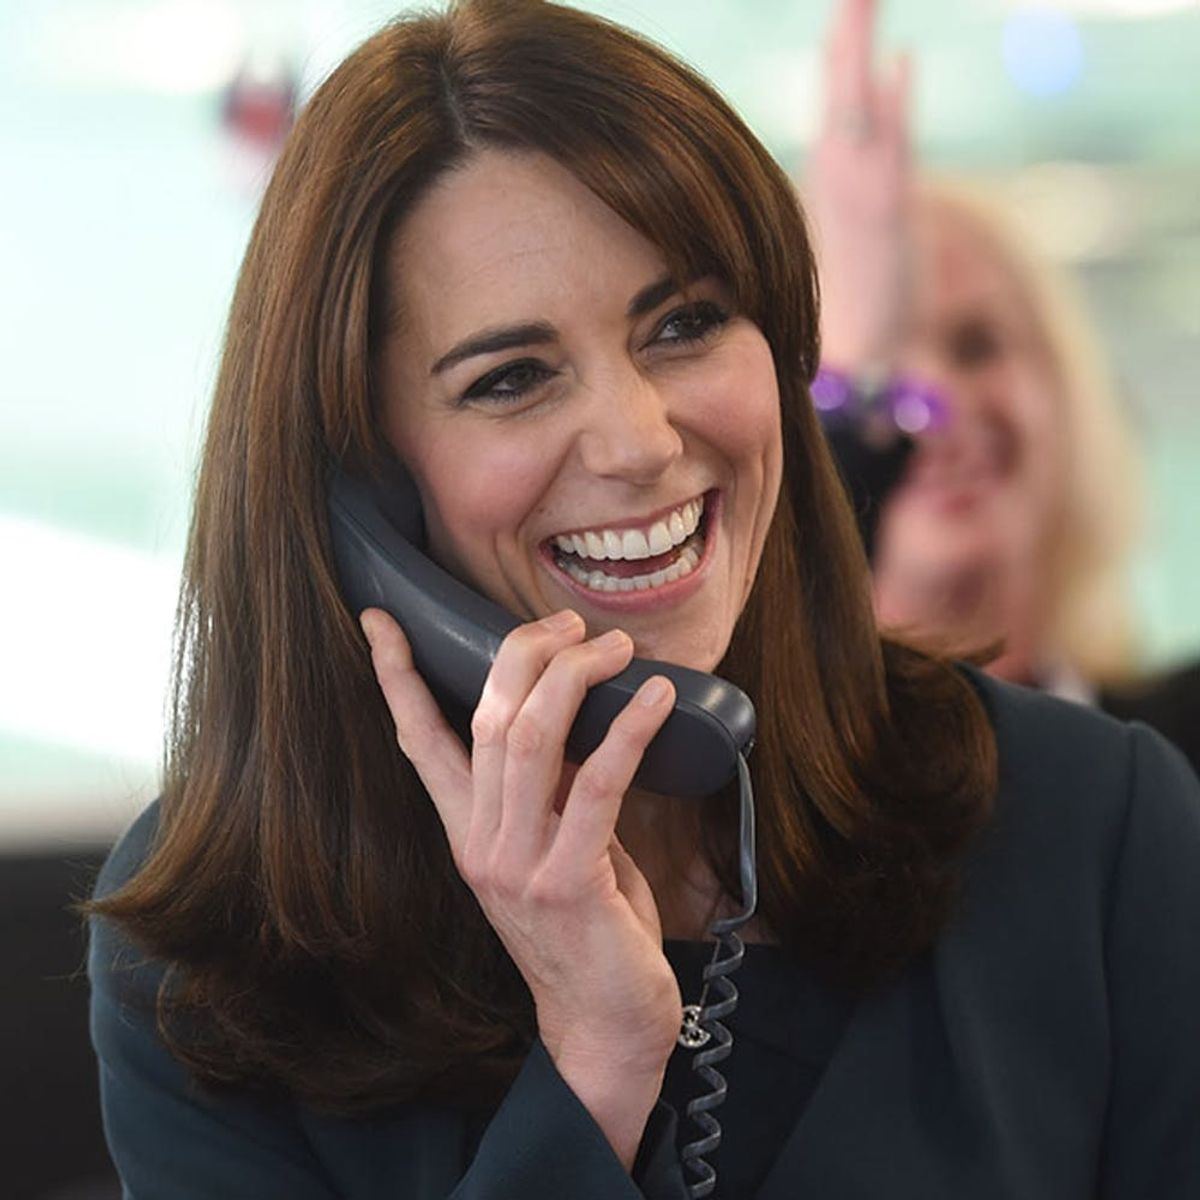 Kate Middleton Is Huffington Post’s Newest Guest Editor